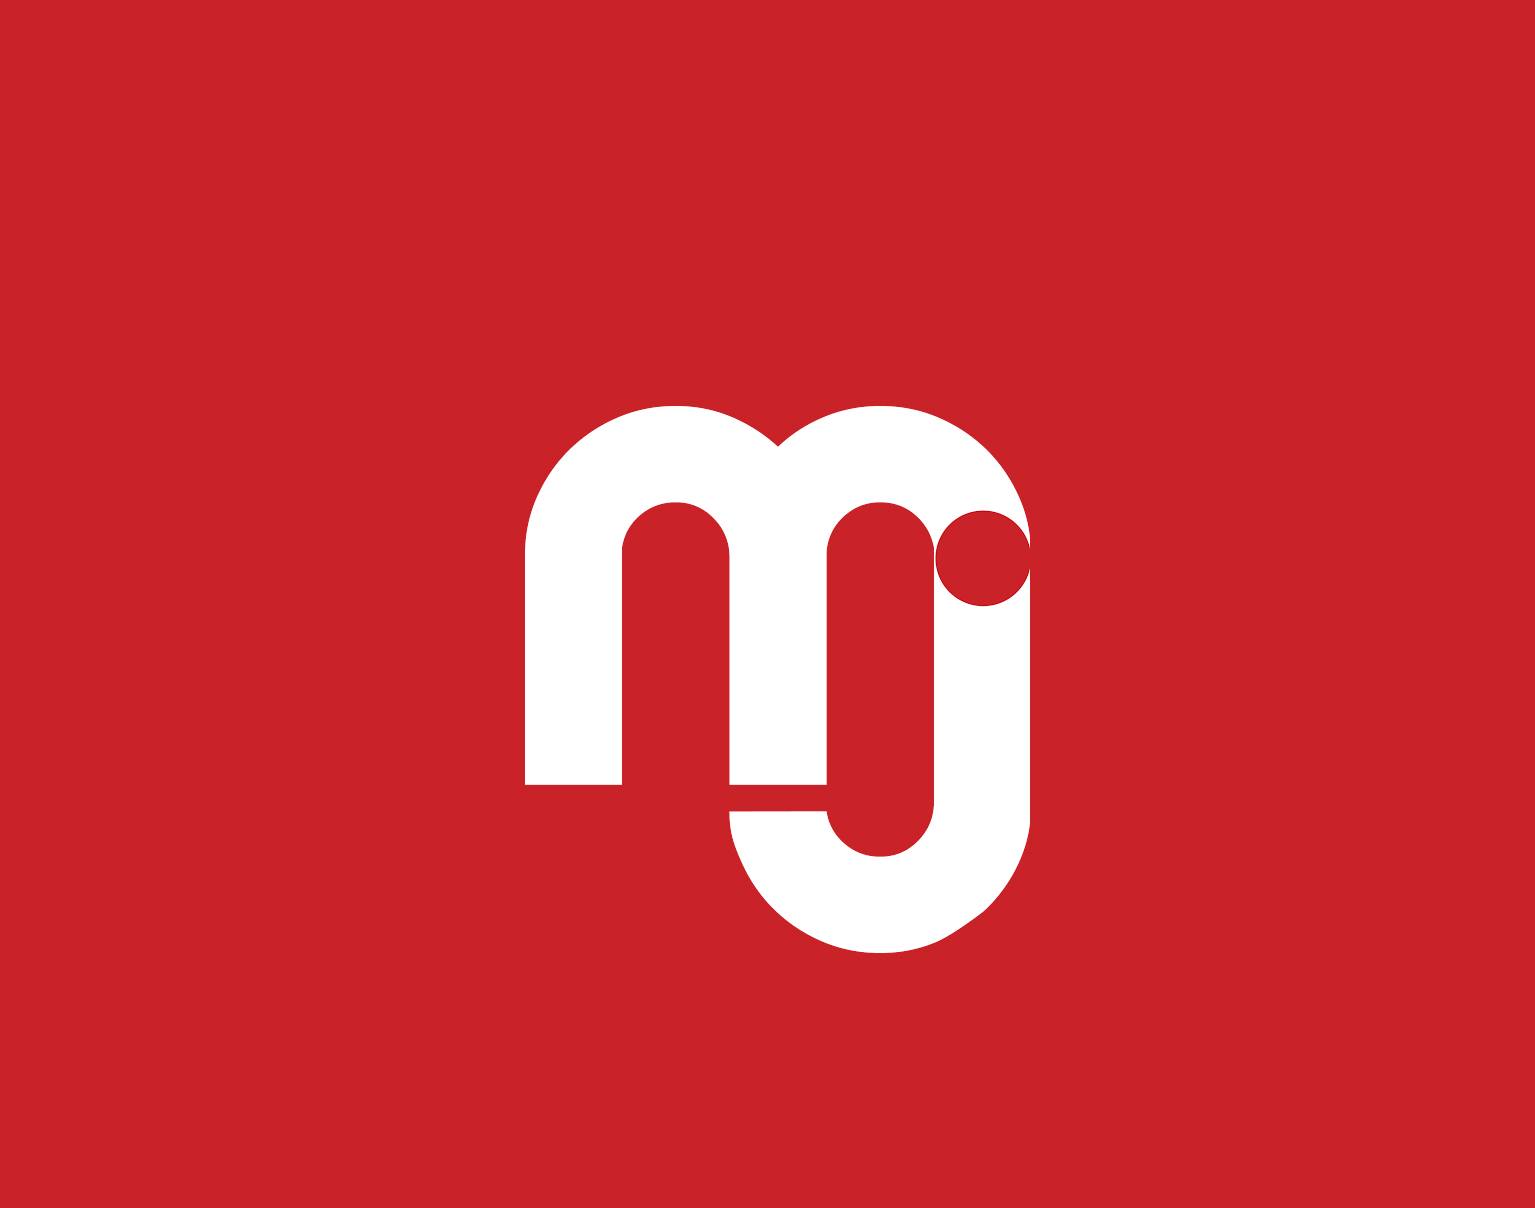 Metacritic Journal for Comparative Studies and Theory